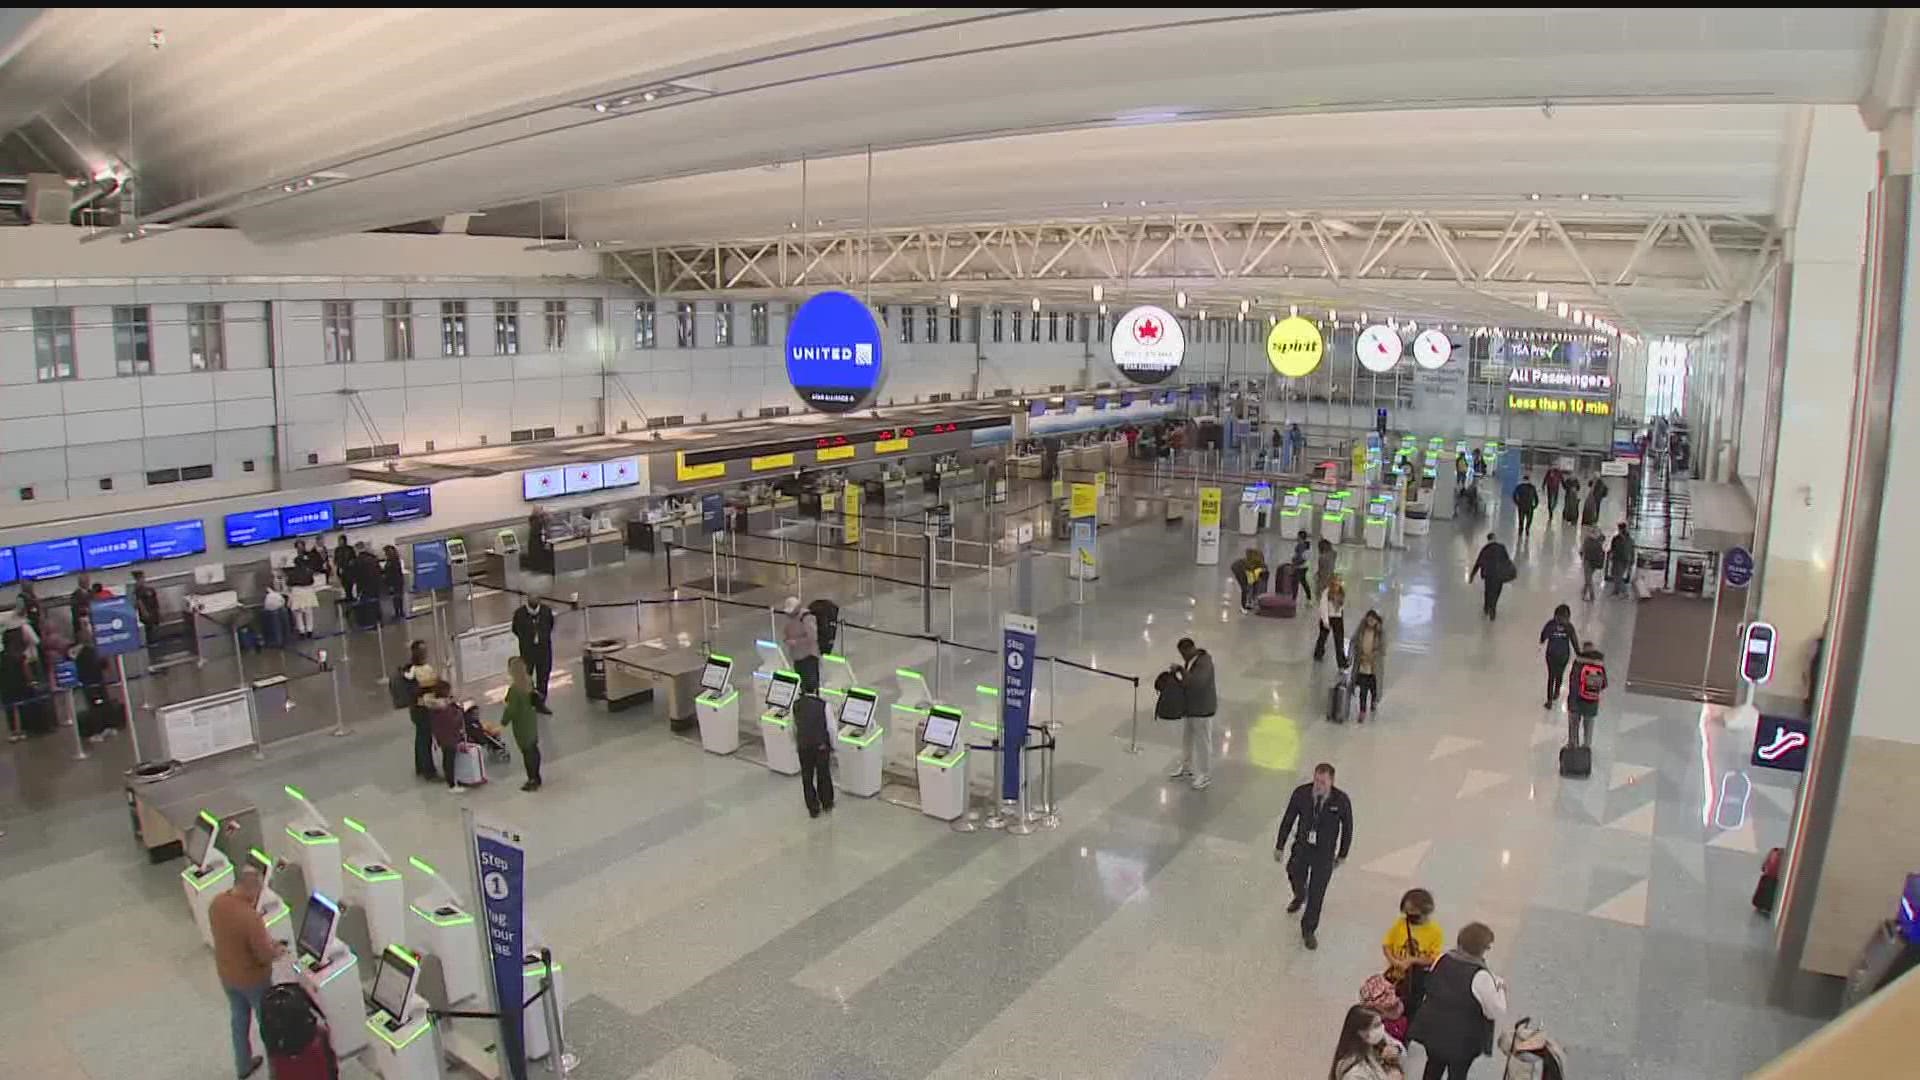 More than 32,000 people are expected to pass through security on Wednesday at MSP.